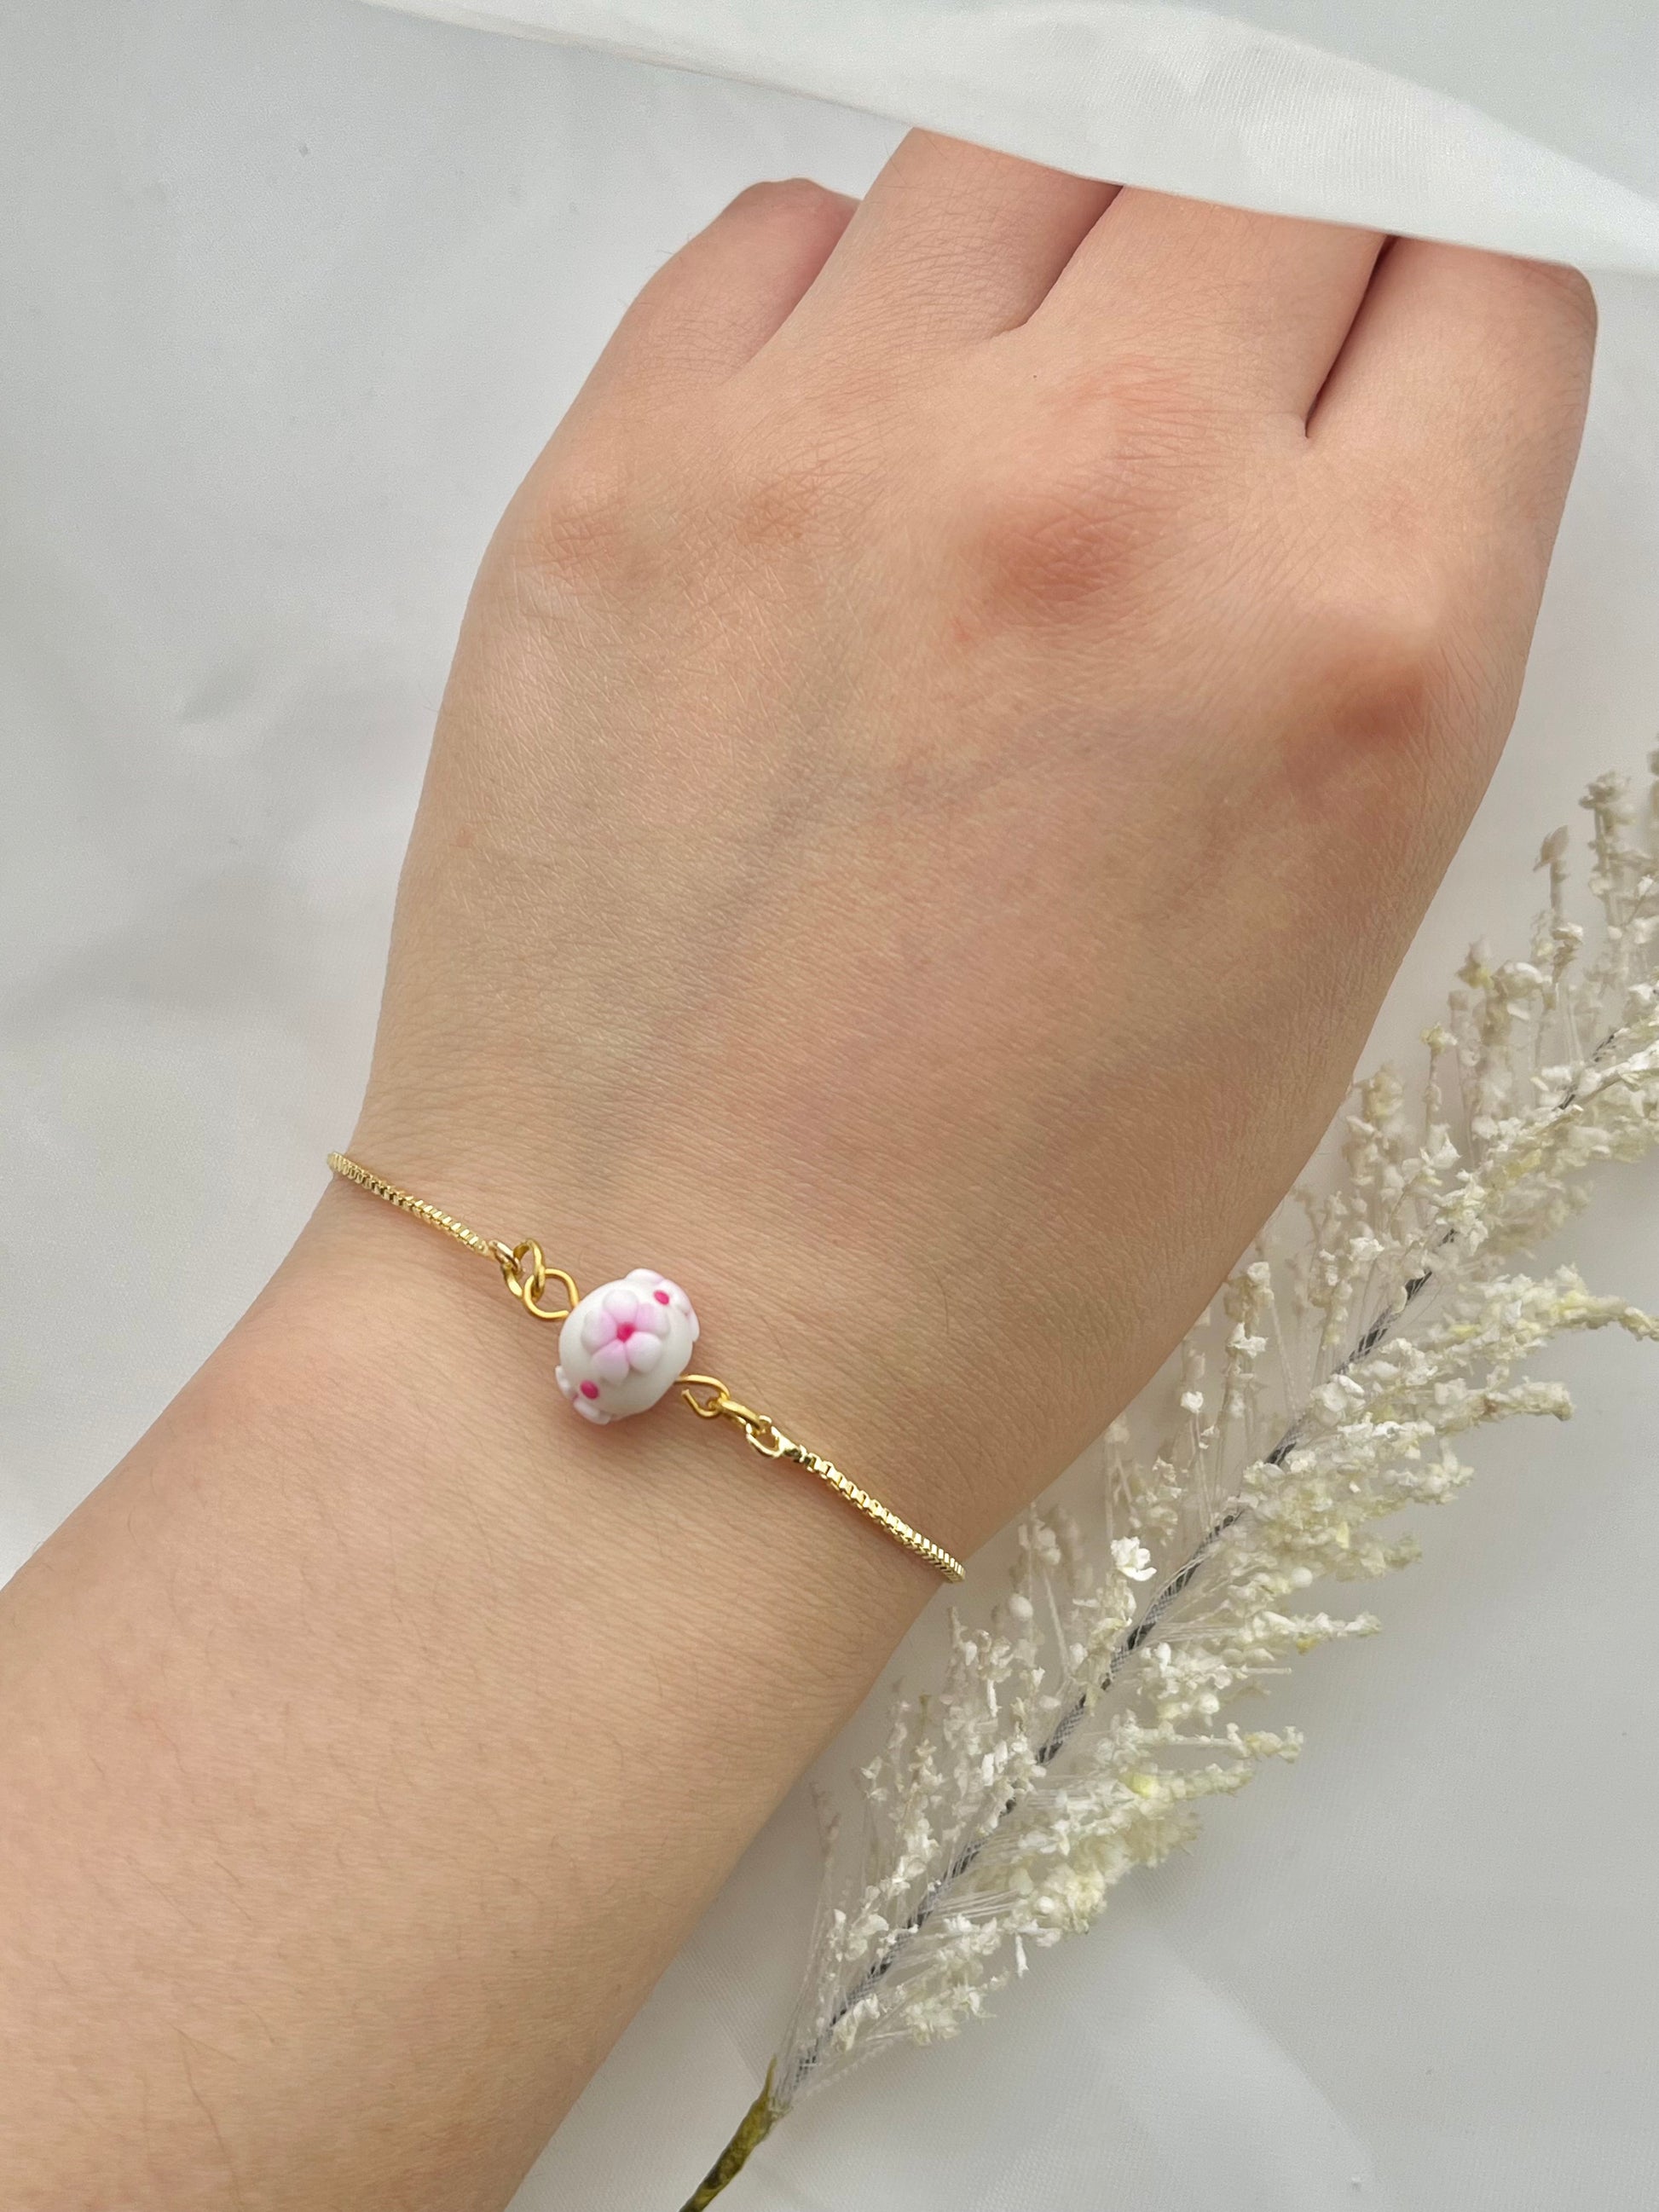 A floral bracelet in cherry blossom style with 1 bead on a hand